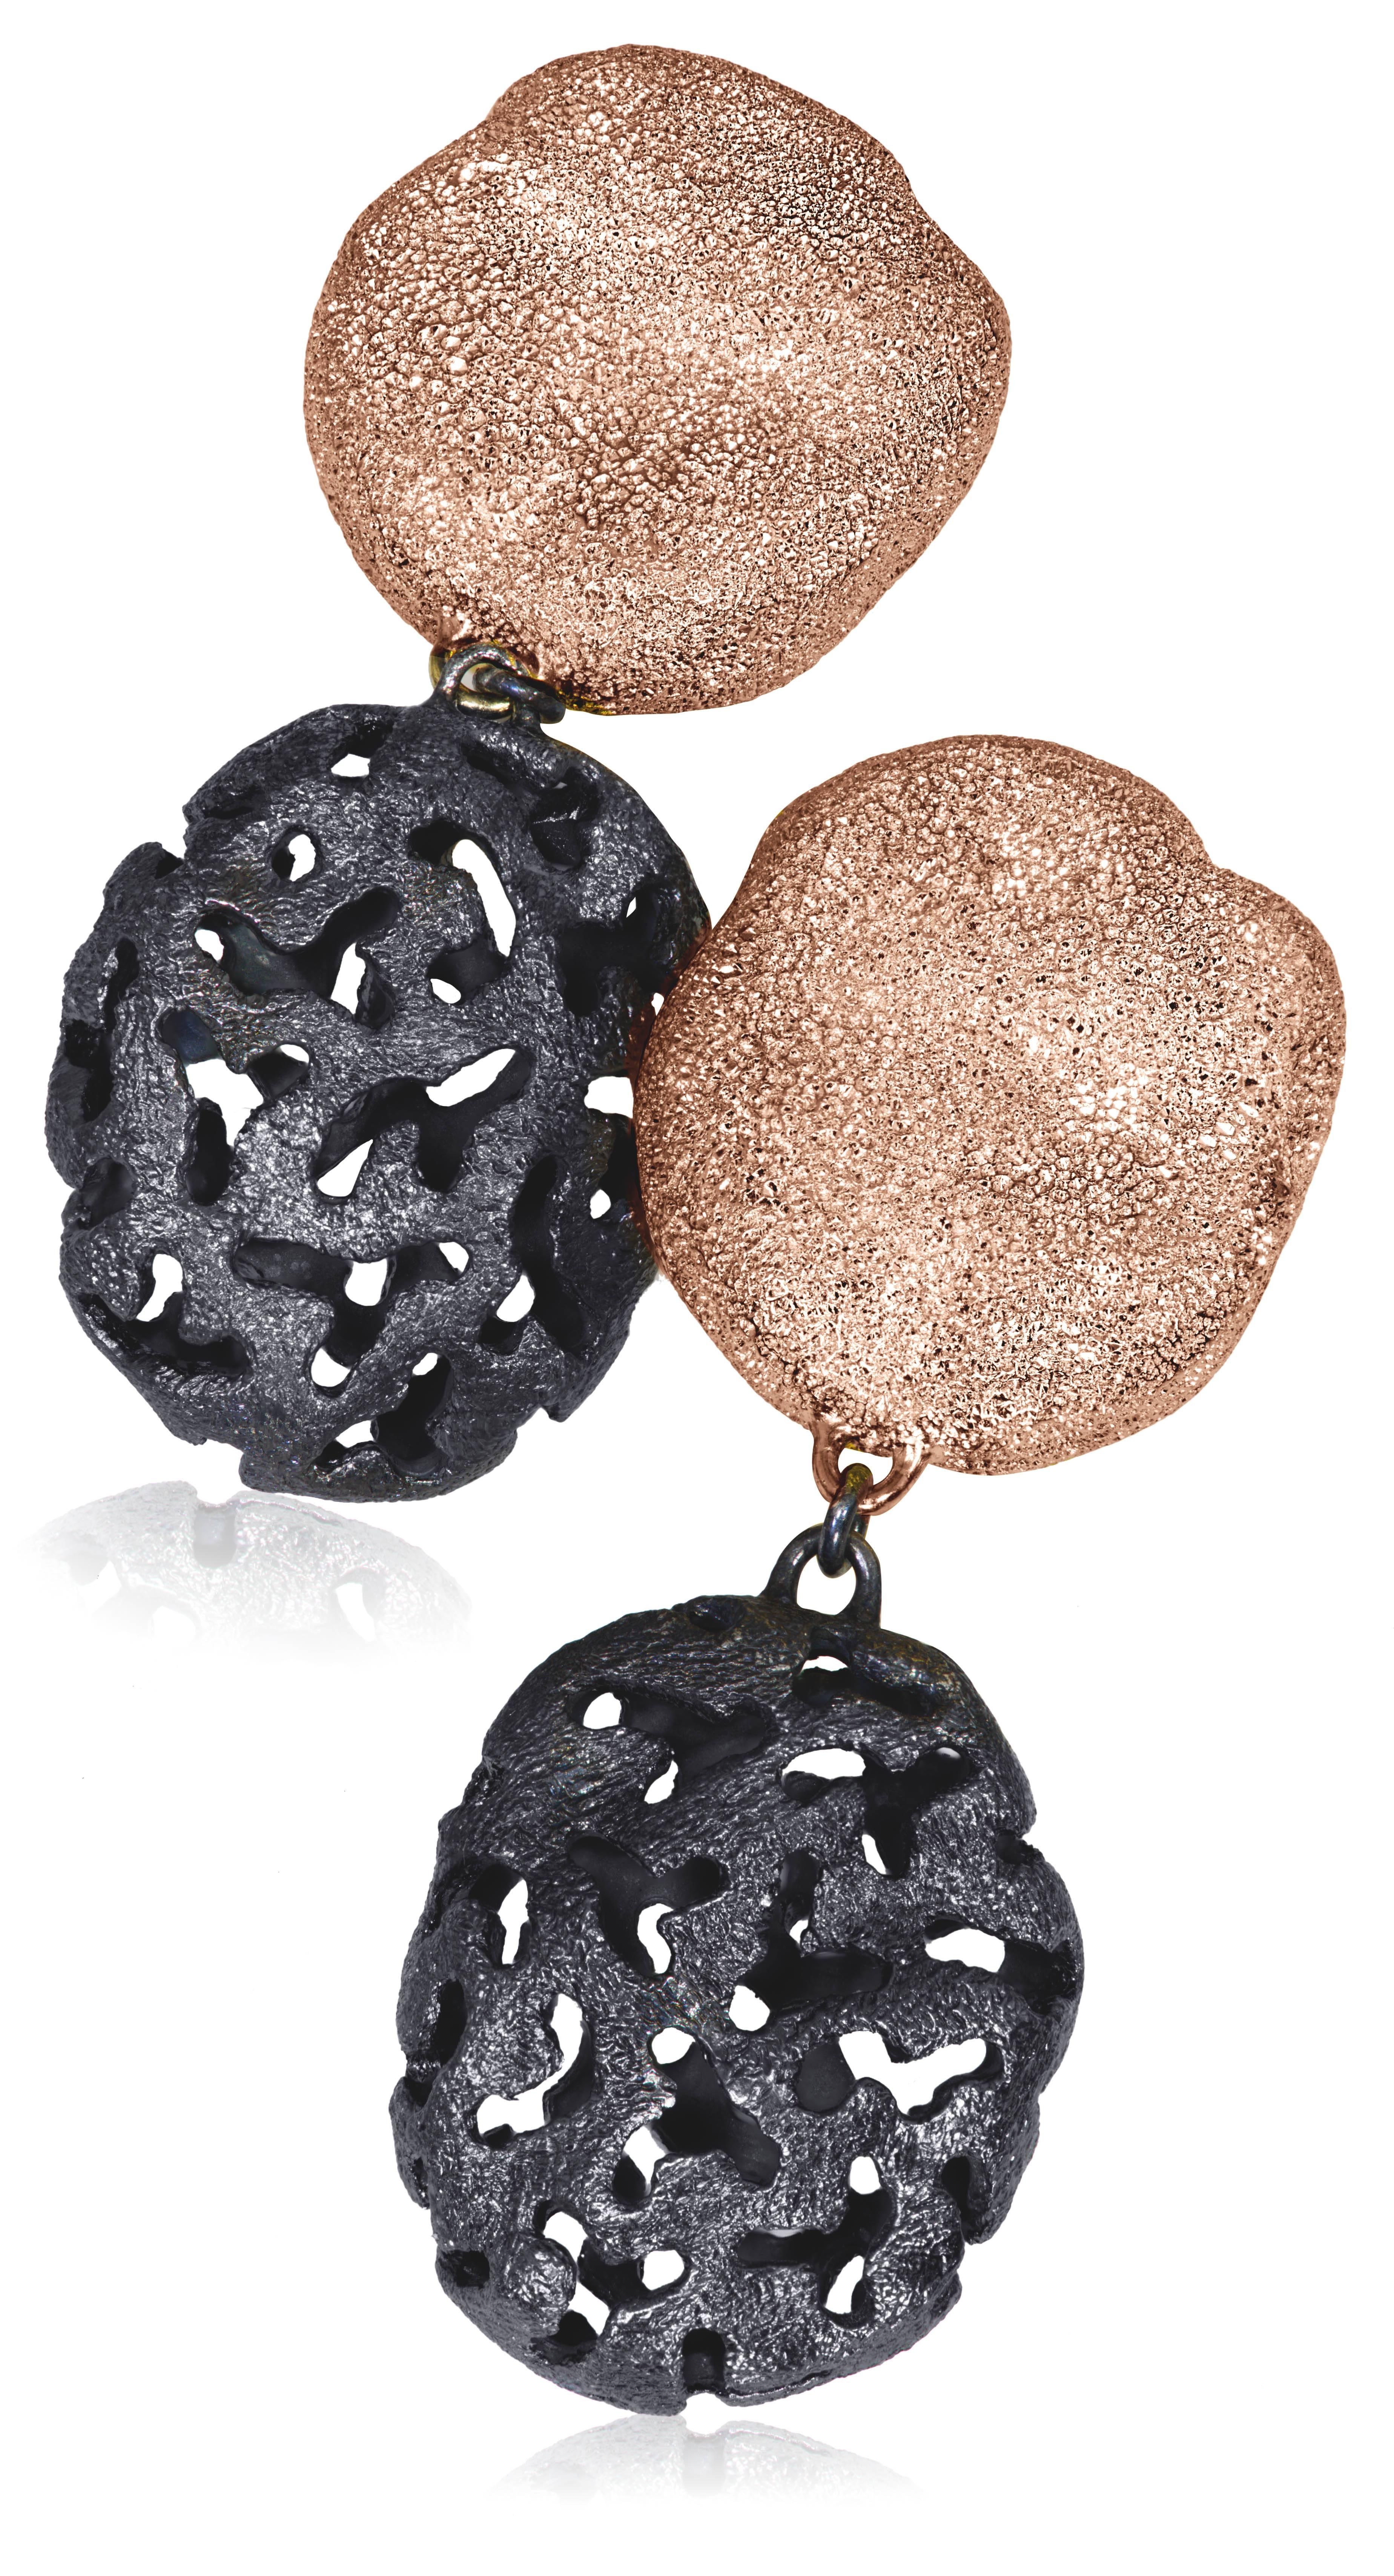 Alex Soldier Moneta Earrings made in silver with 18k rose gold and dark platinum (rhodium) infusion (deep plating) and signature metalwork that creates an illusion of a diamond inlay. Handmade in NYC.  

About The Artist: Known for his elaborate